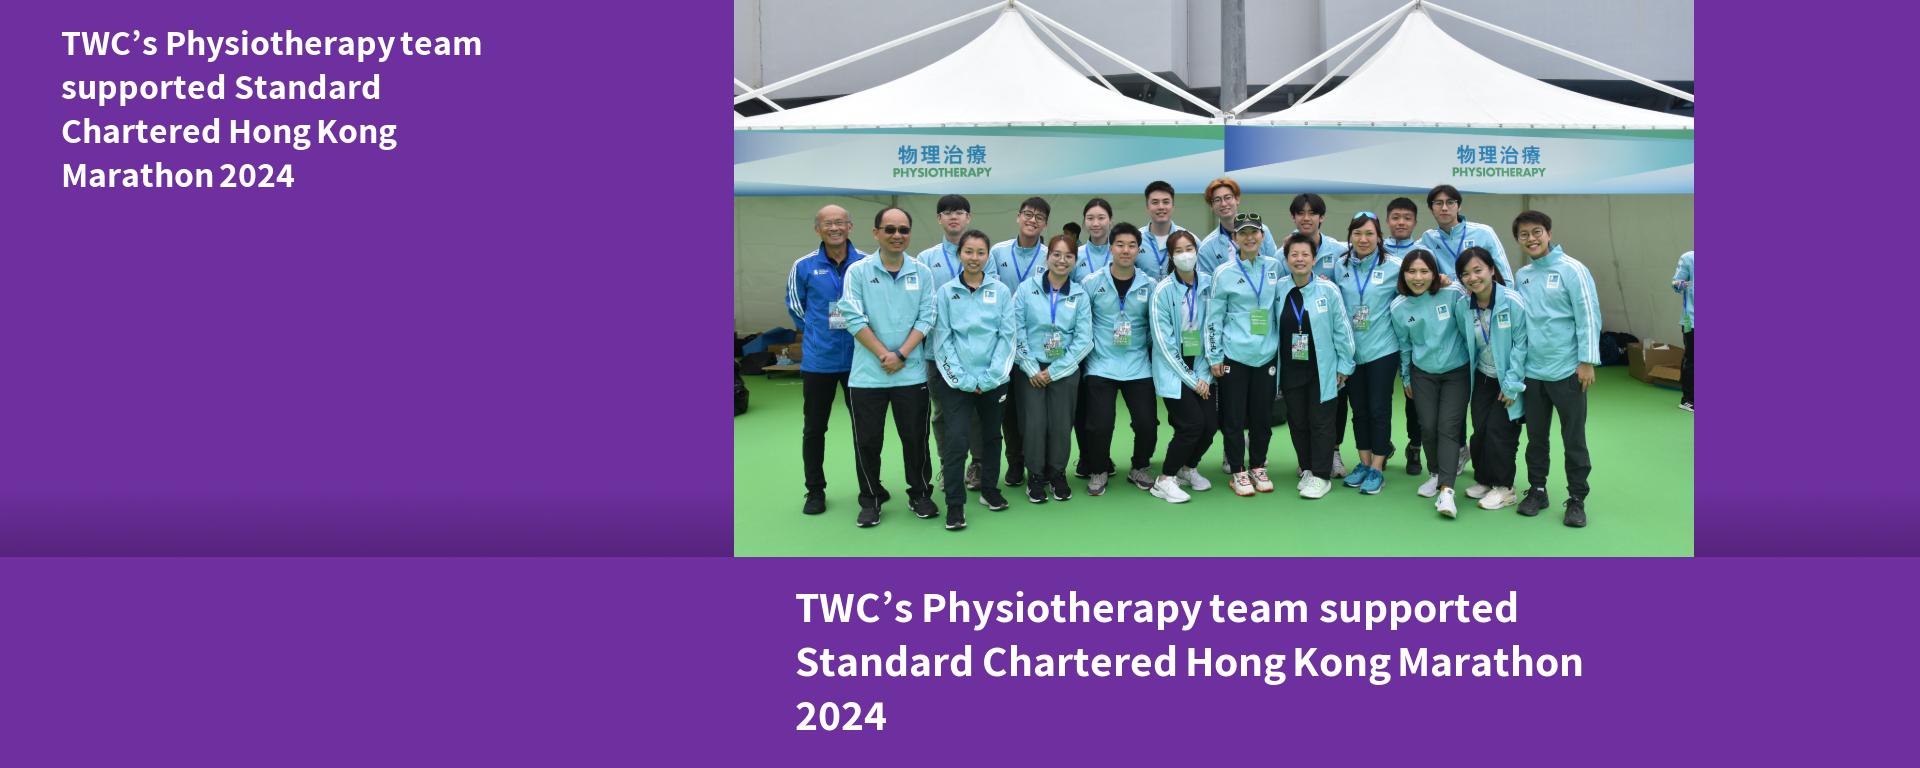 TWC’s Physiotherapy team supported Standard Chartered Hong Kong Marathon 2024